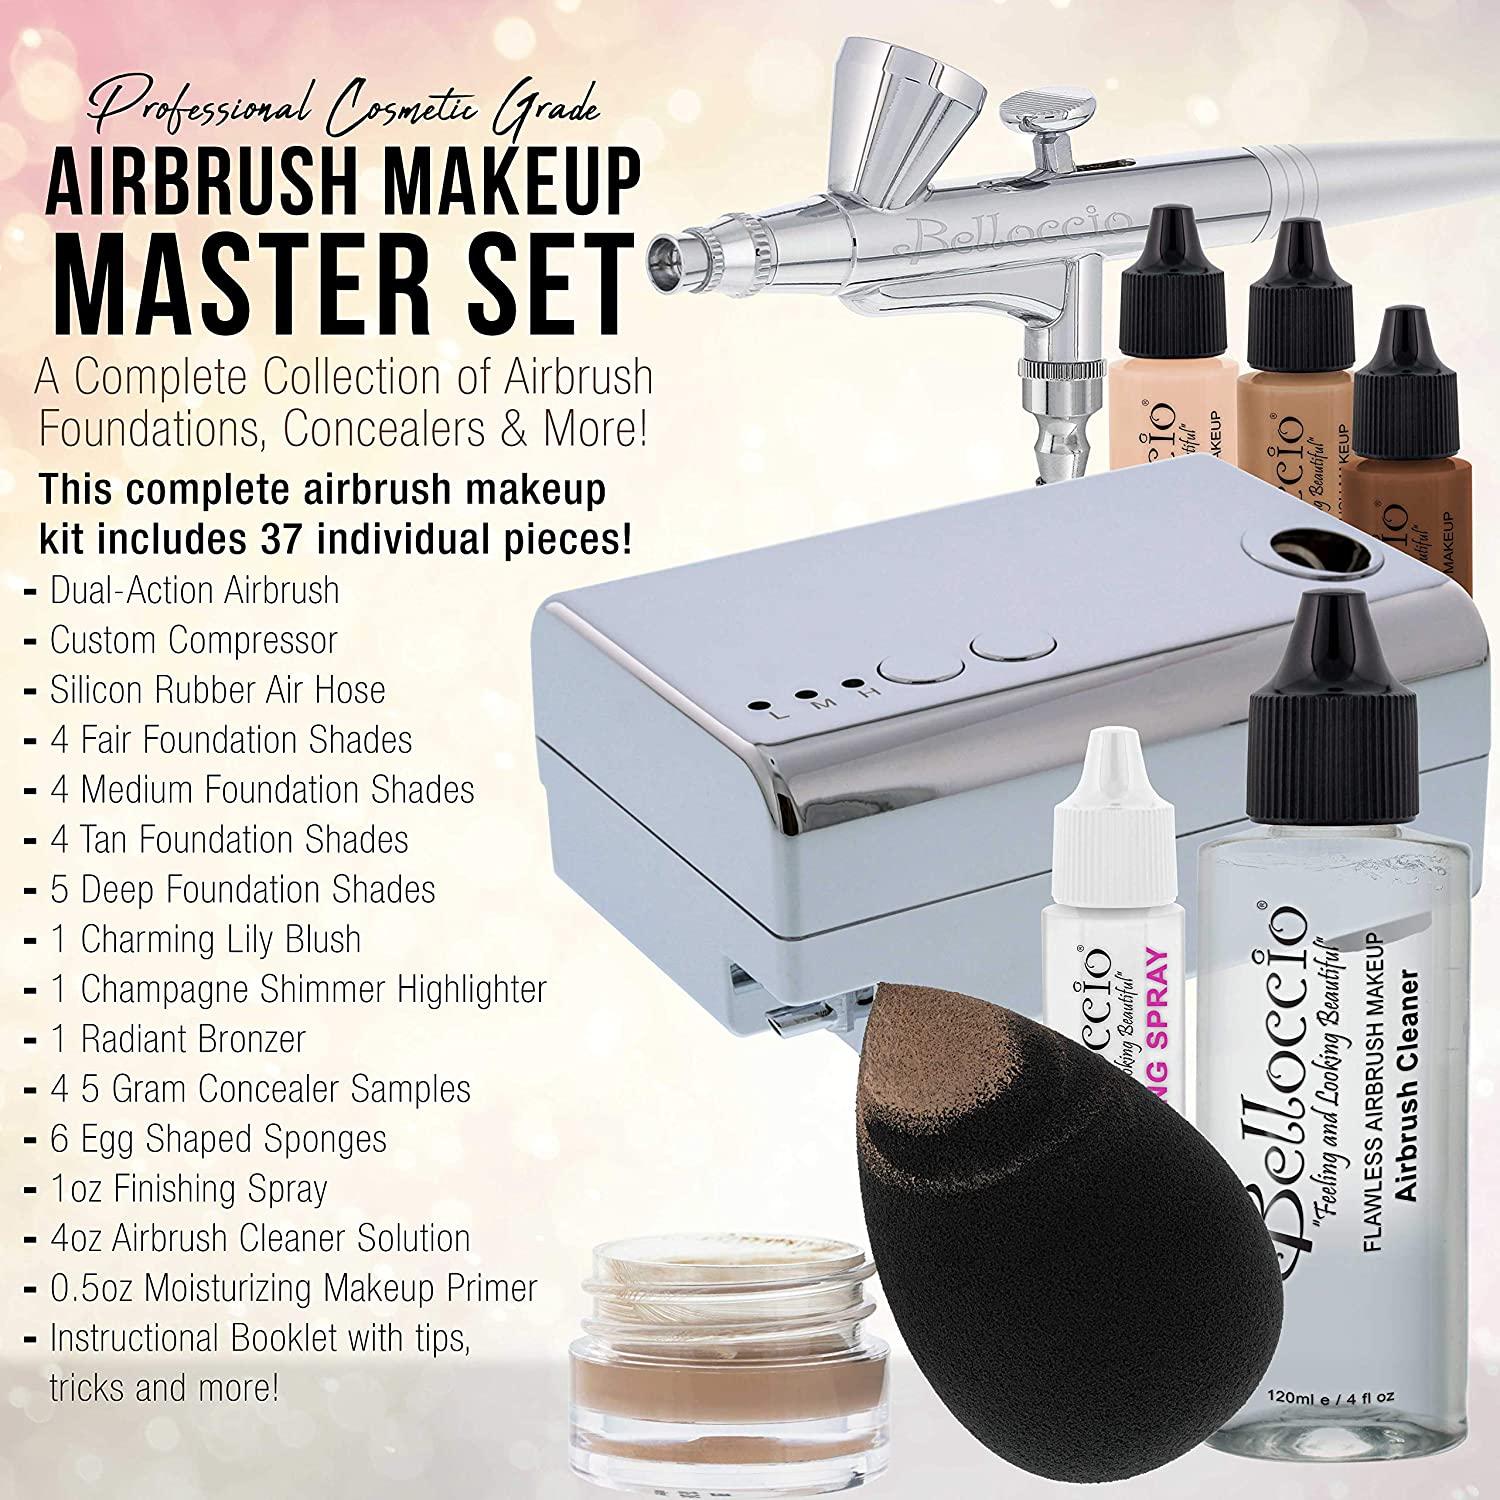 Belloccio Airbrush Cosmetic Makeup System with a MASTER SET of All